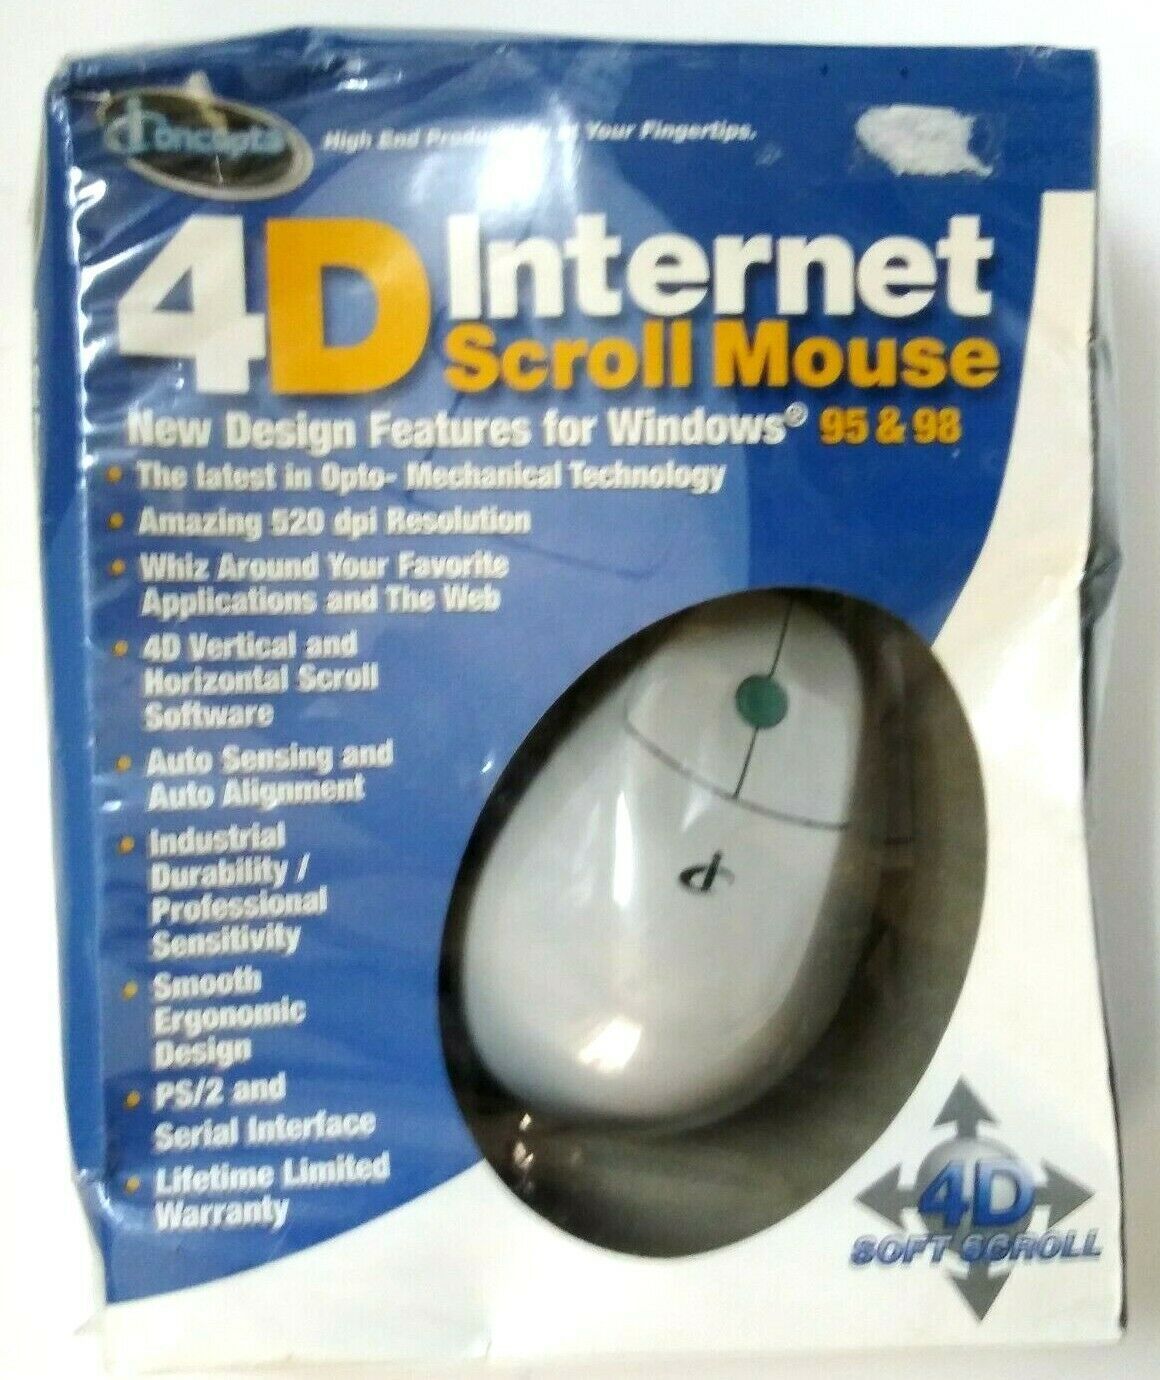 VINTAGE ICONCEPTS 4D INTERNET SCROLL COMPUTER MOUSE NEW IN ORIGINAL BOX